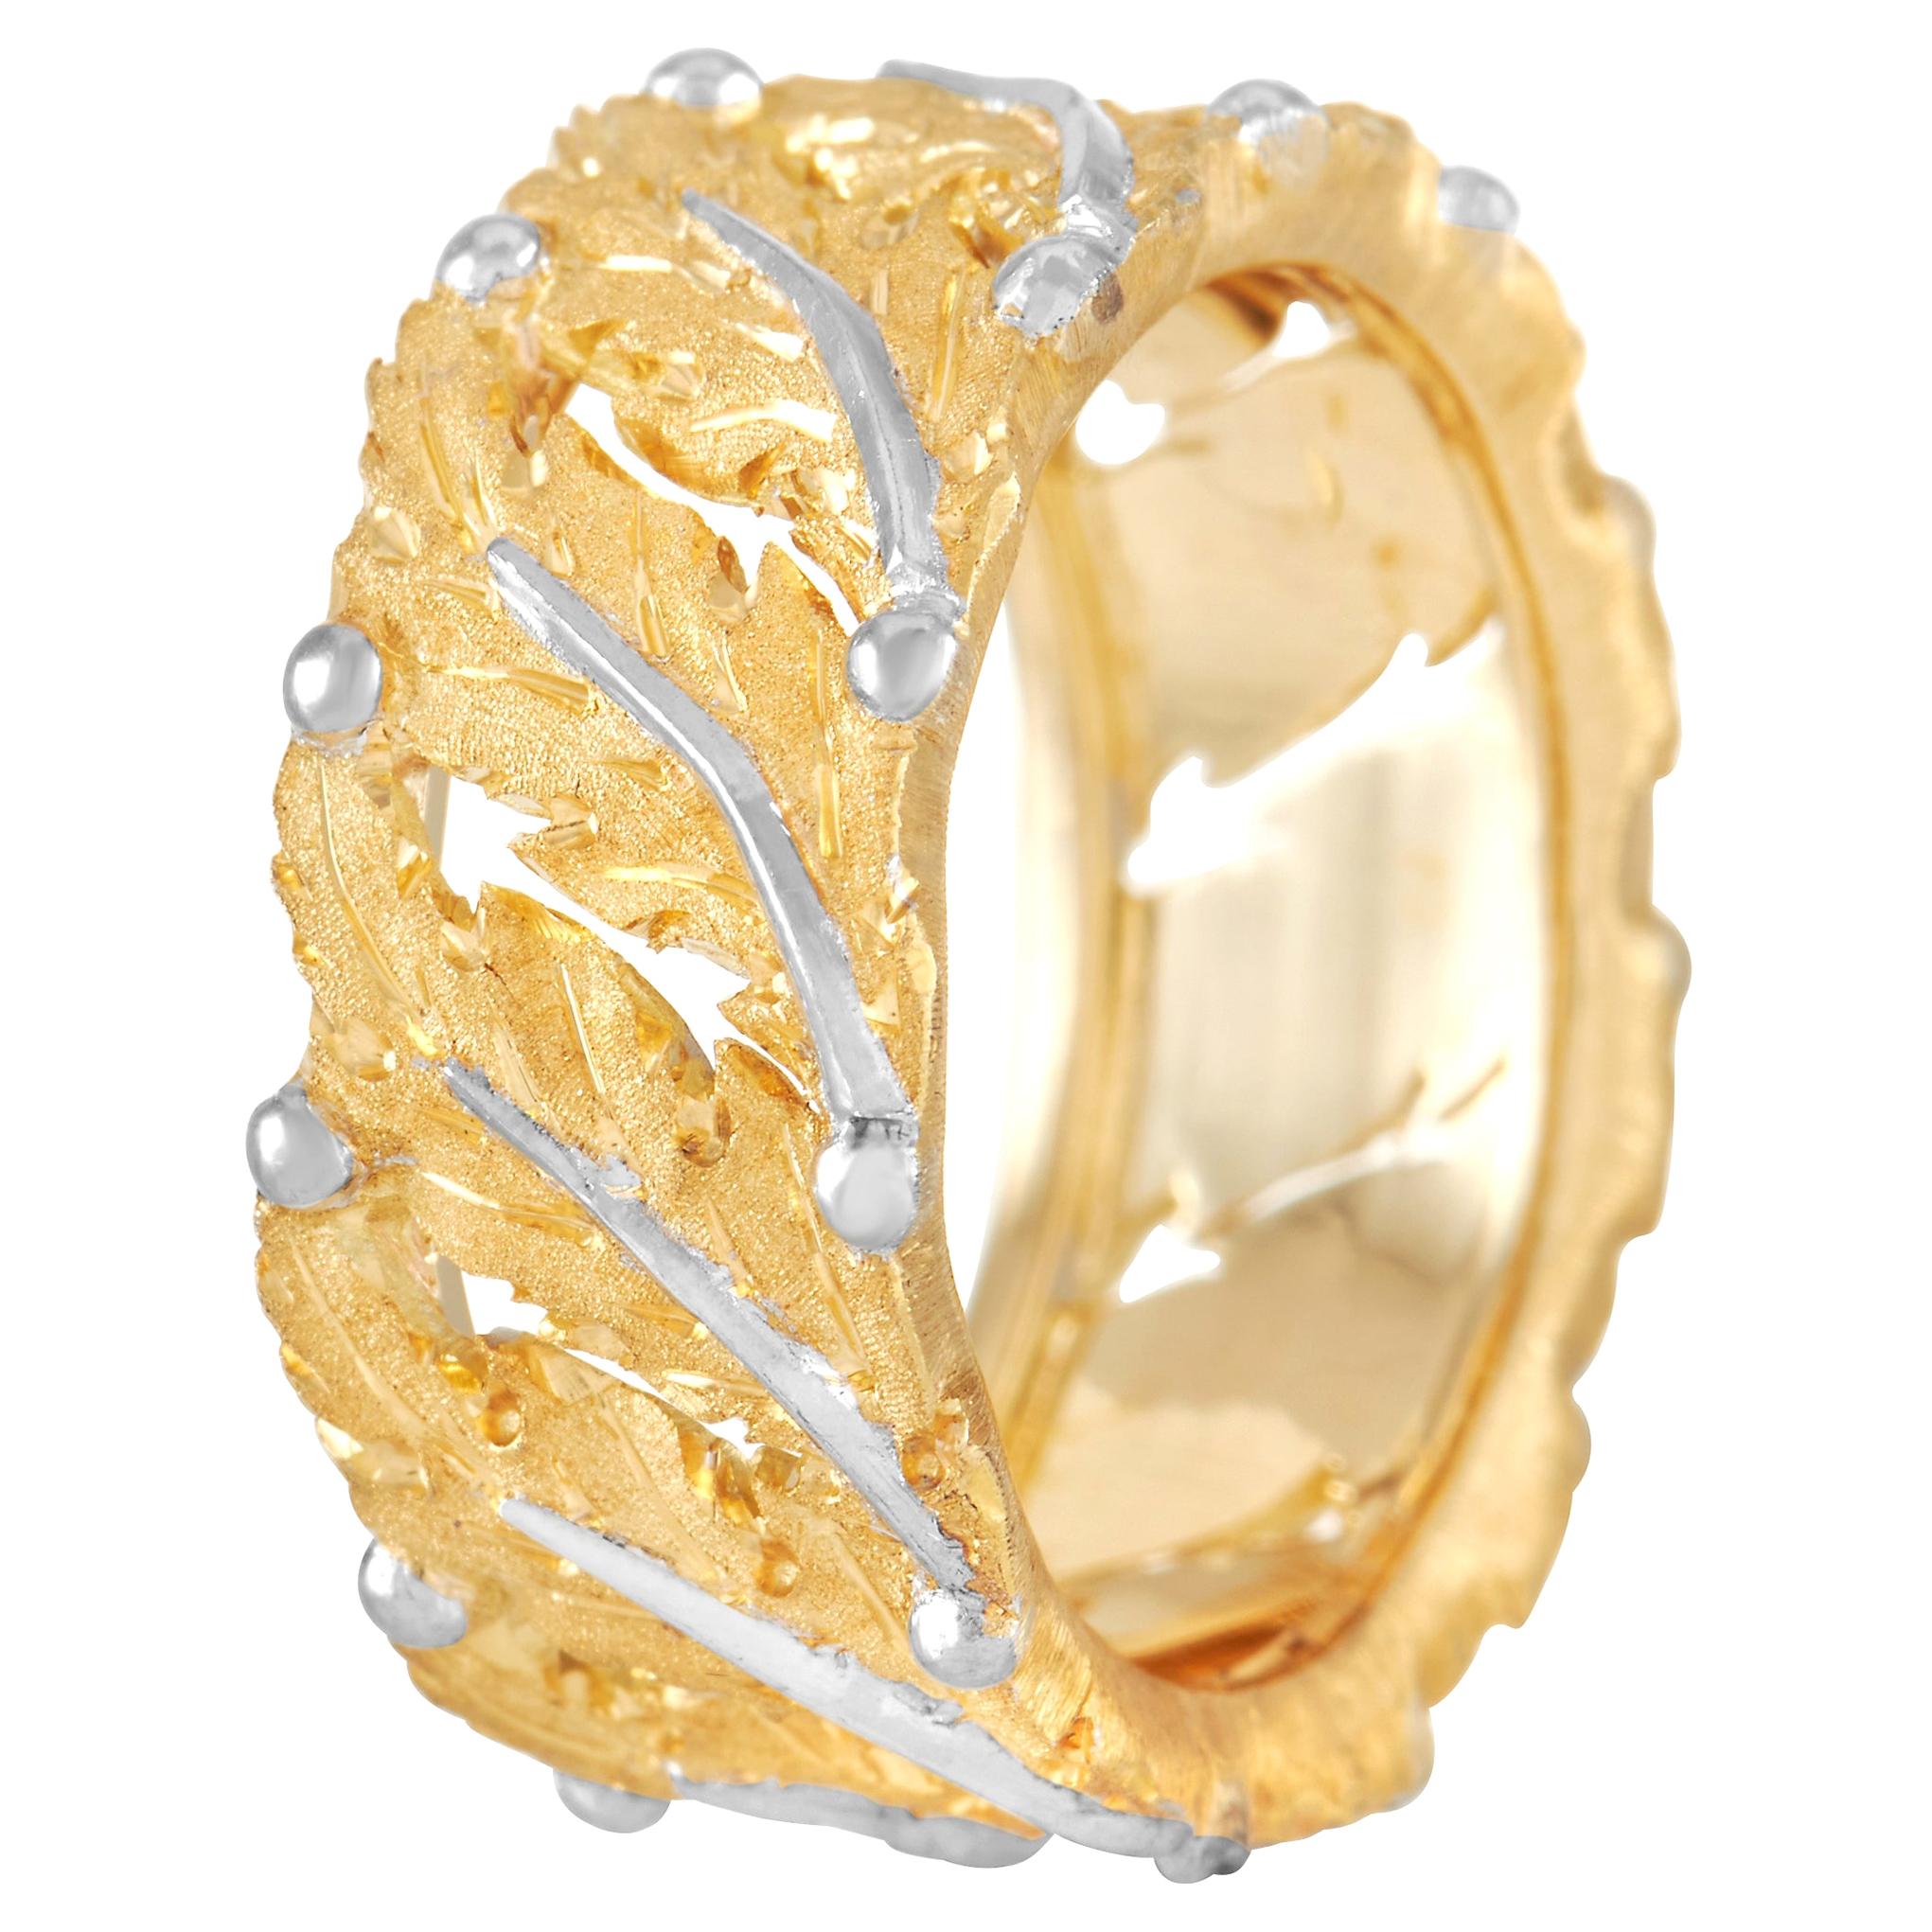 Buccellati Eternelle 18k Yellow and White Gold Leaf Motif Ring